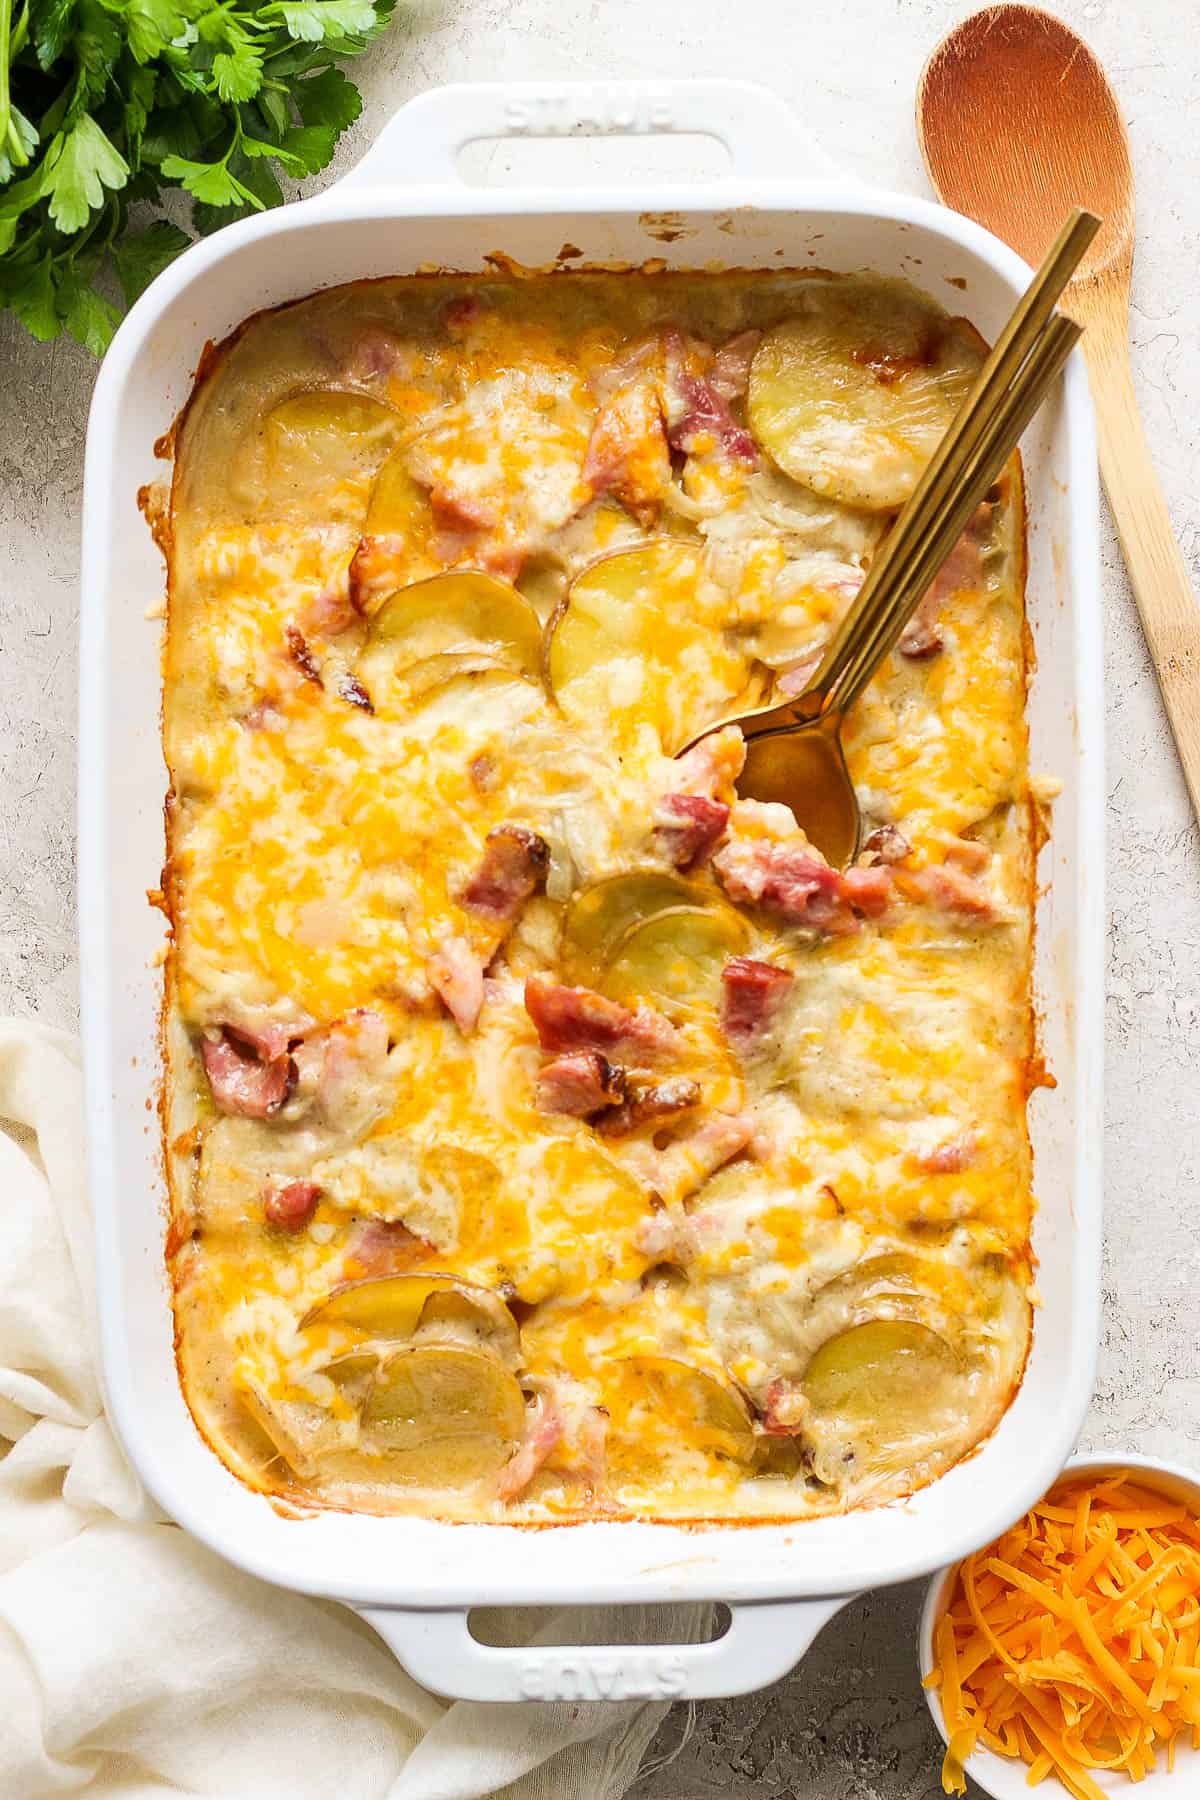 Scalloped potatoes and ham fully cooked in a white baking dish.